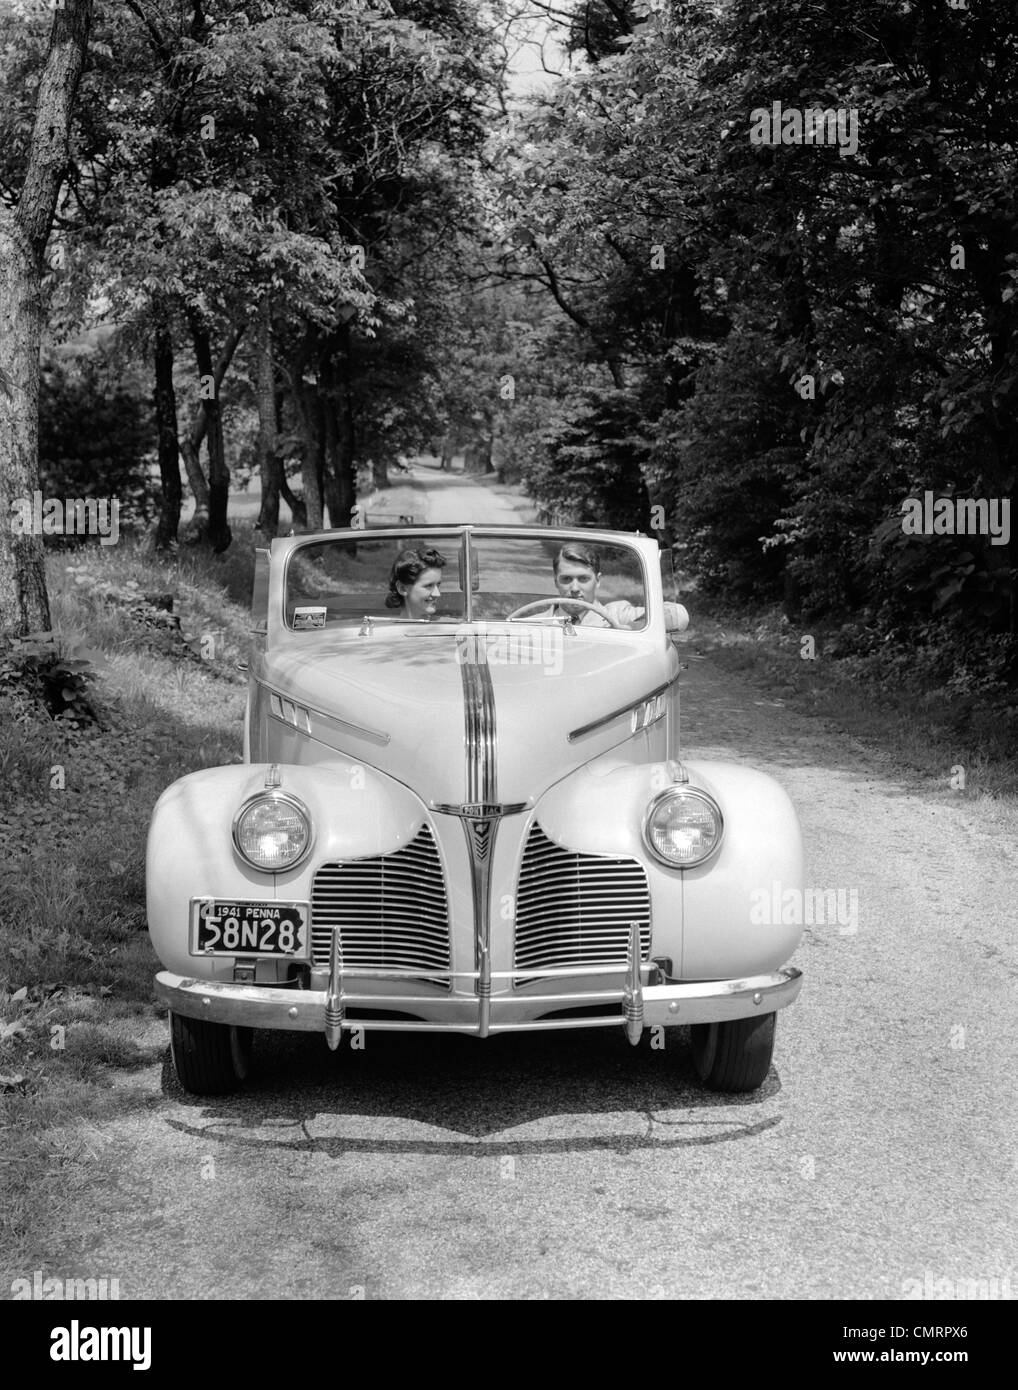 1940s 1941 COUPLE MAN AND WOMAN IN PONTIAC CONVERTIBLE DRIVING ON COUNTRY LANE IN COUNTRYSIDE Stock Photo